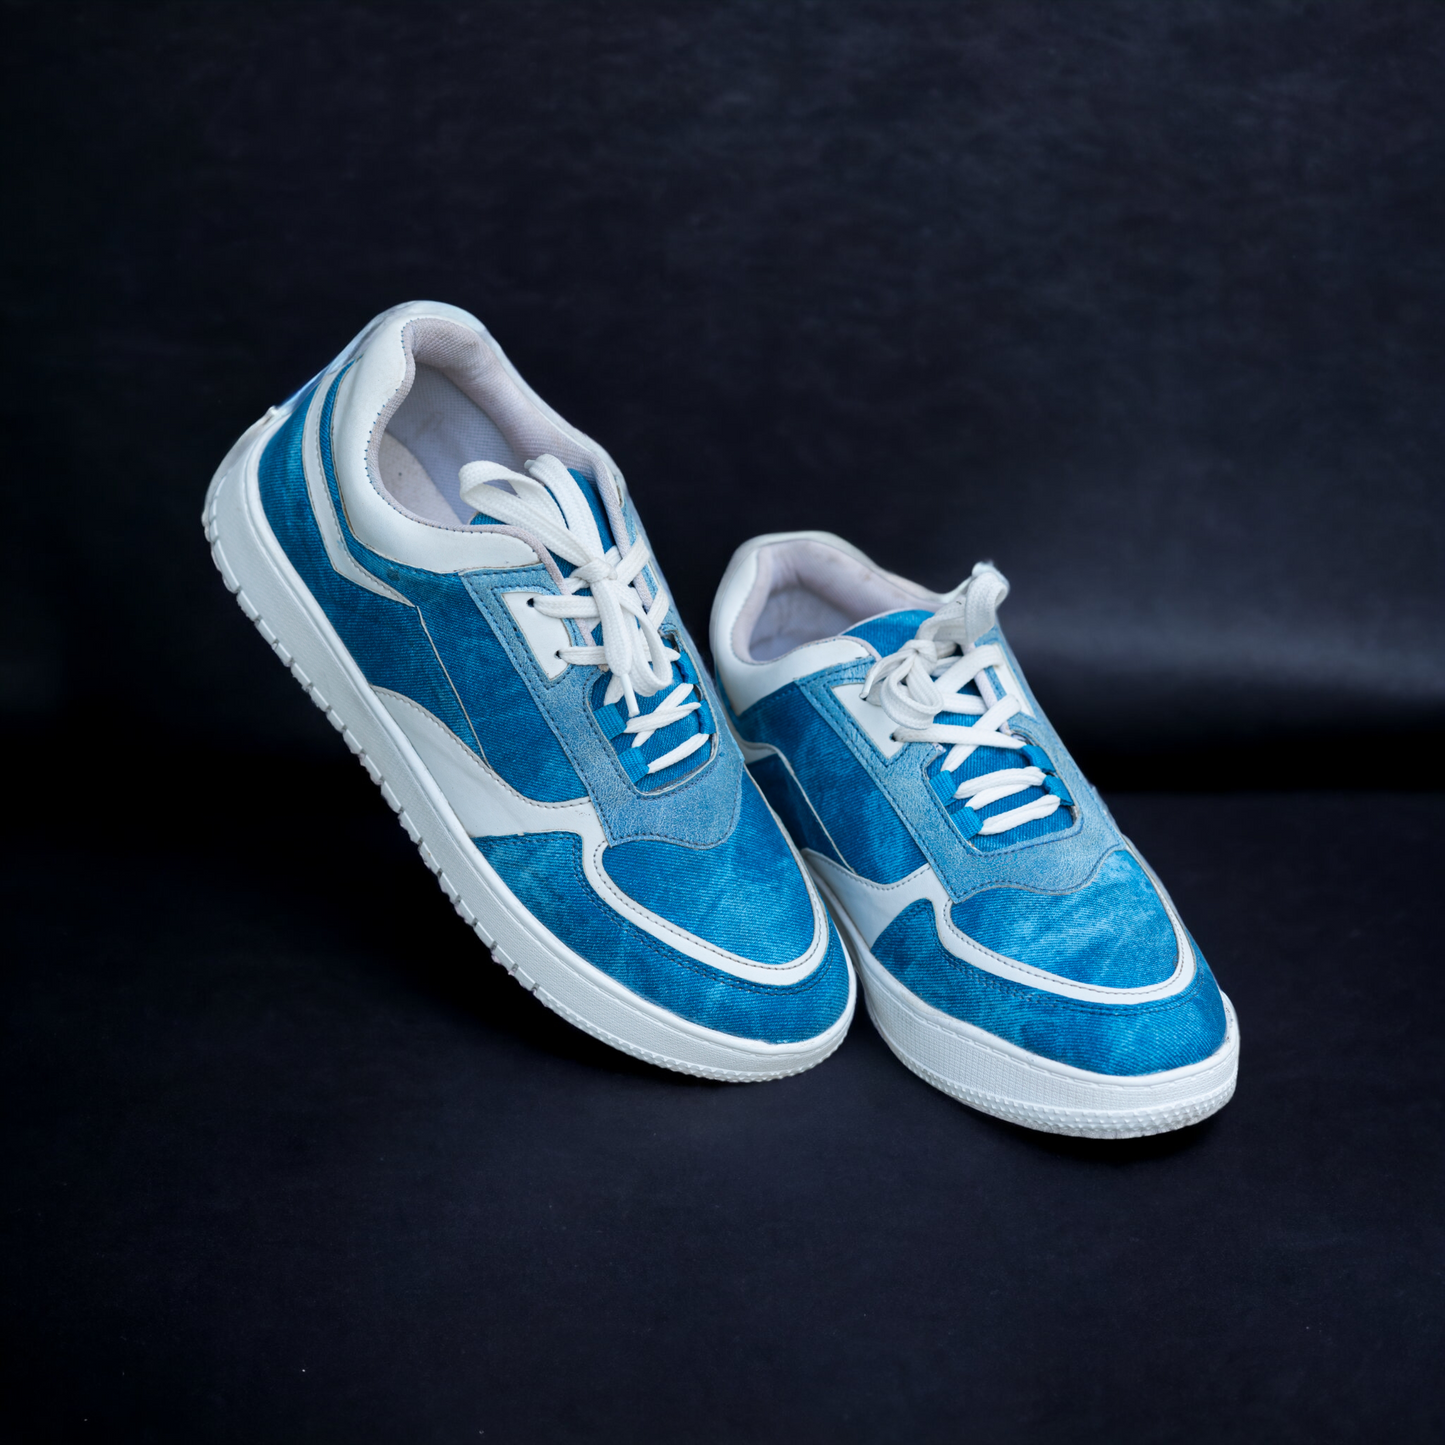 The Aurous Sapphire Laceup Sneakers